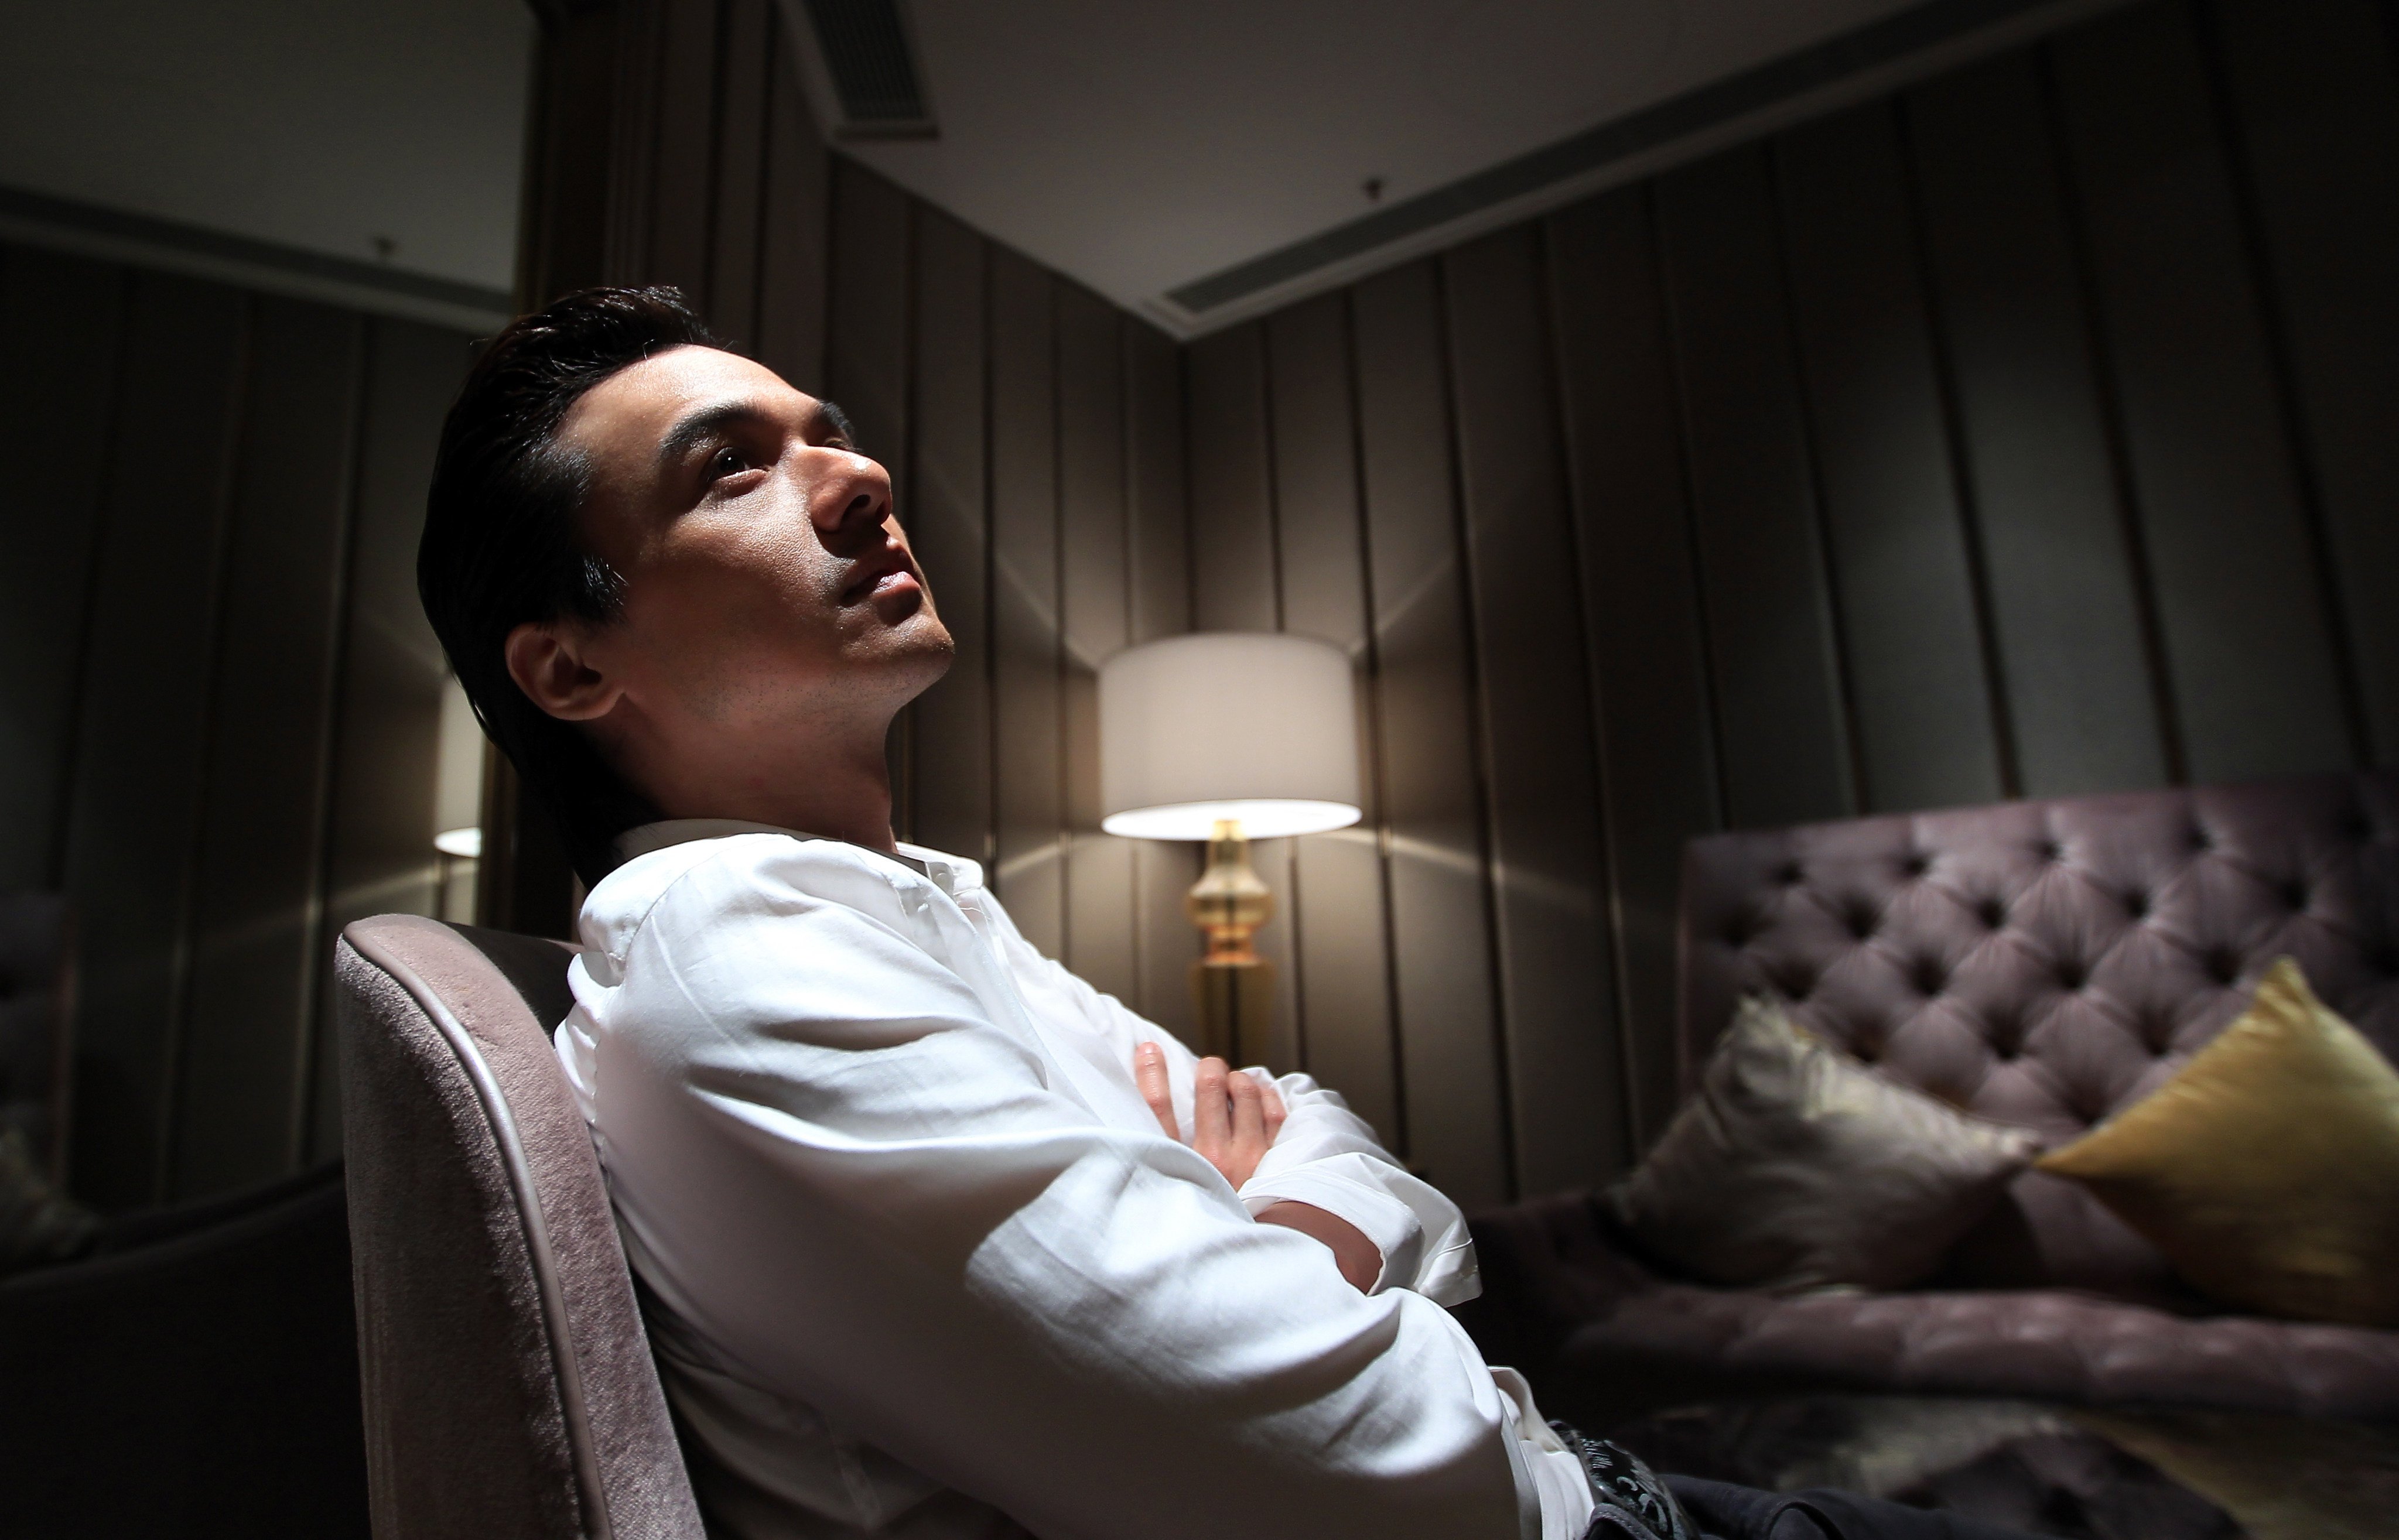 Hong Kong actor and filmmaker Stephen Fung Tak-lun, pictured in 2012. Photo: SCMP